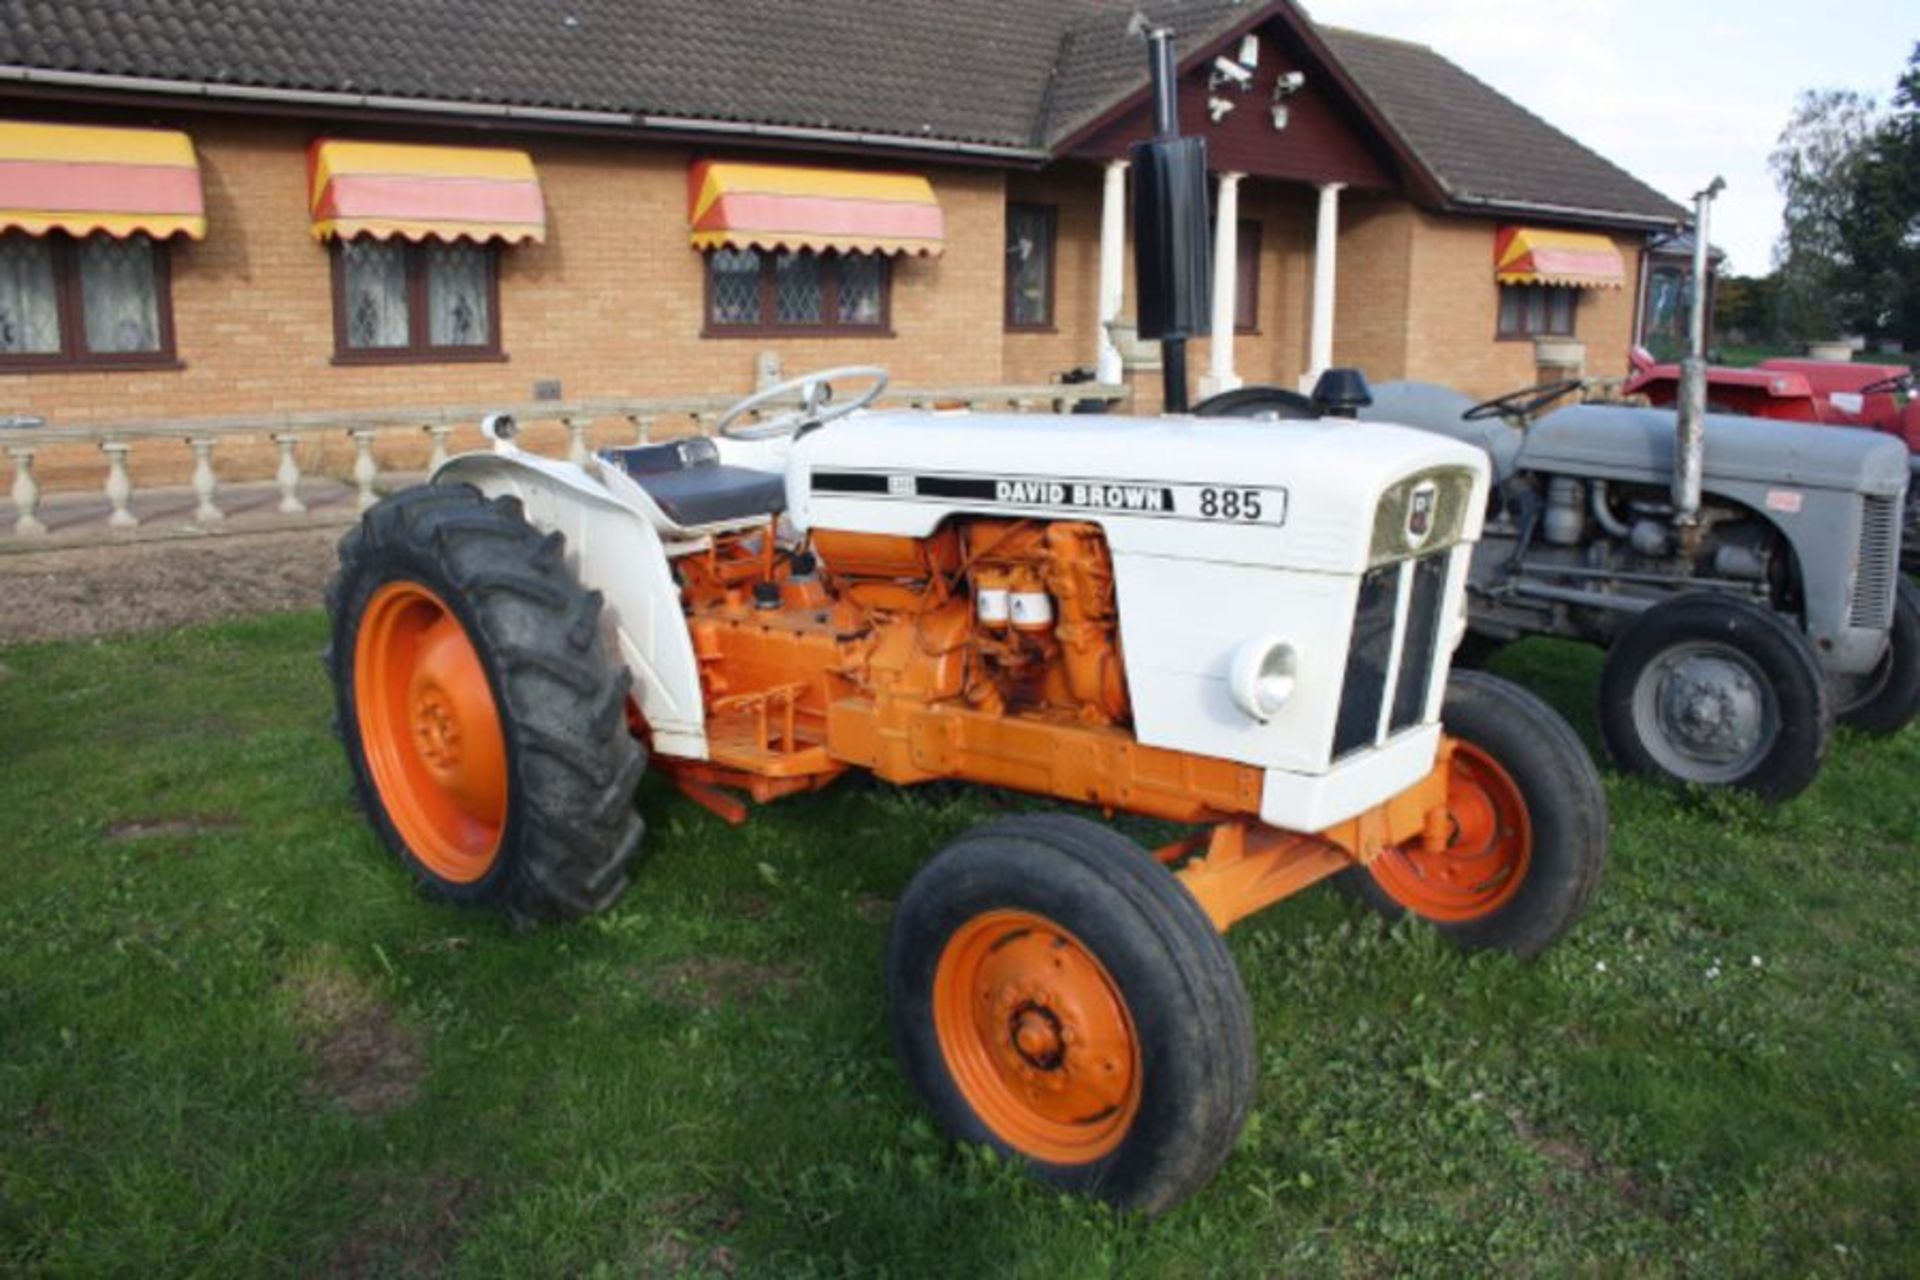 David Brown 885 (1978 or 1979 model) with draw bar, new clock. 12.4-28 rear tyres, 6.00-16 front - Image 2 of 5